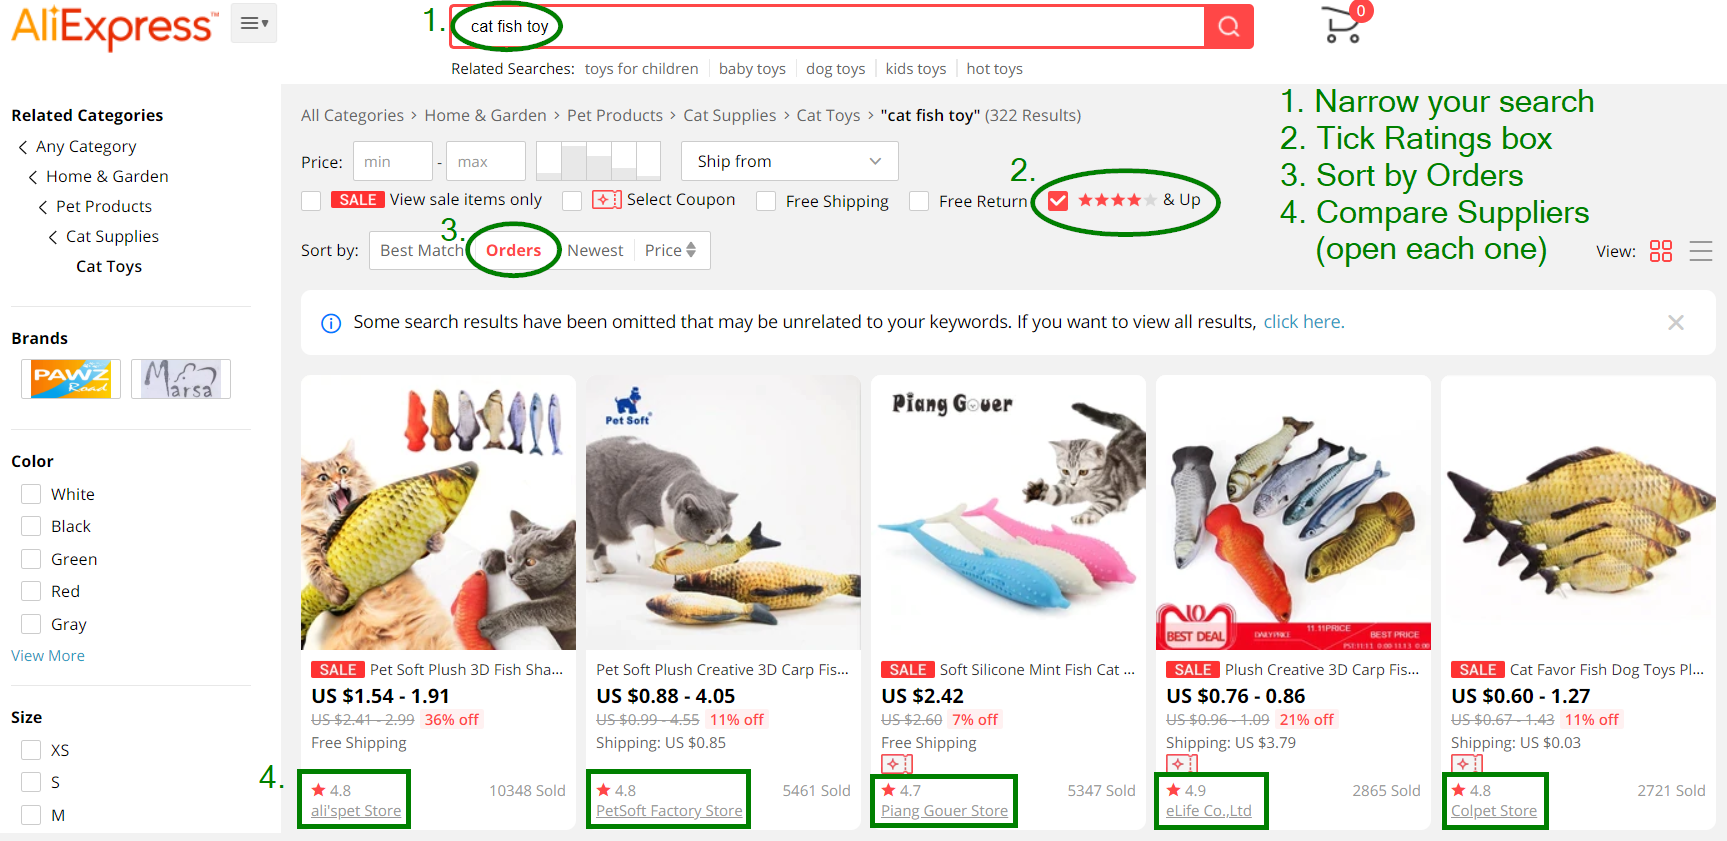 An example of a narrower search for and sorting of products on AliExpress.